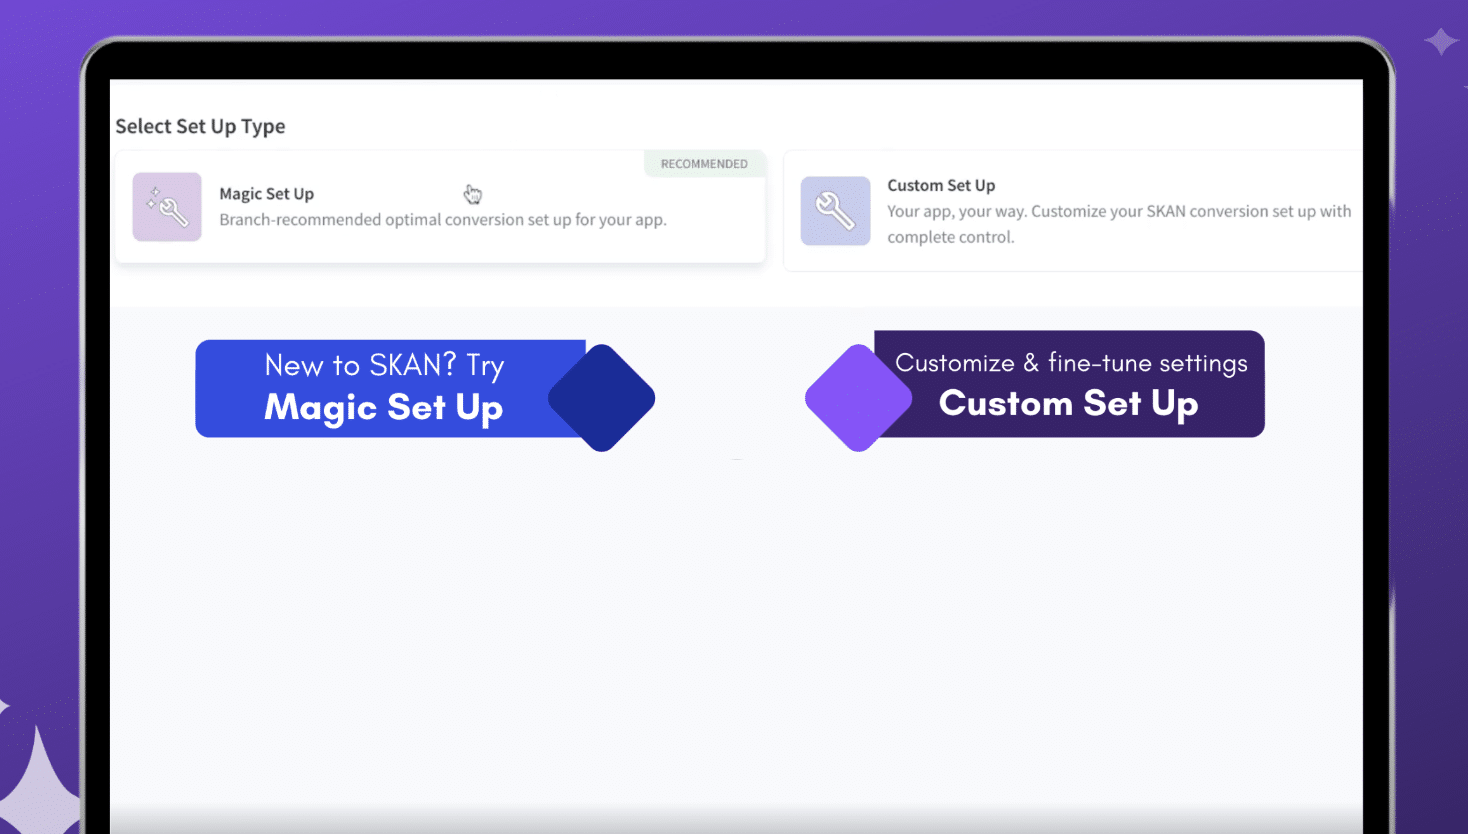 Branch Dashboard showing two set up type options: Magic Set Up and Custom Set Up. 